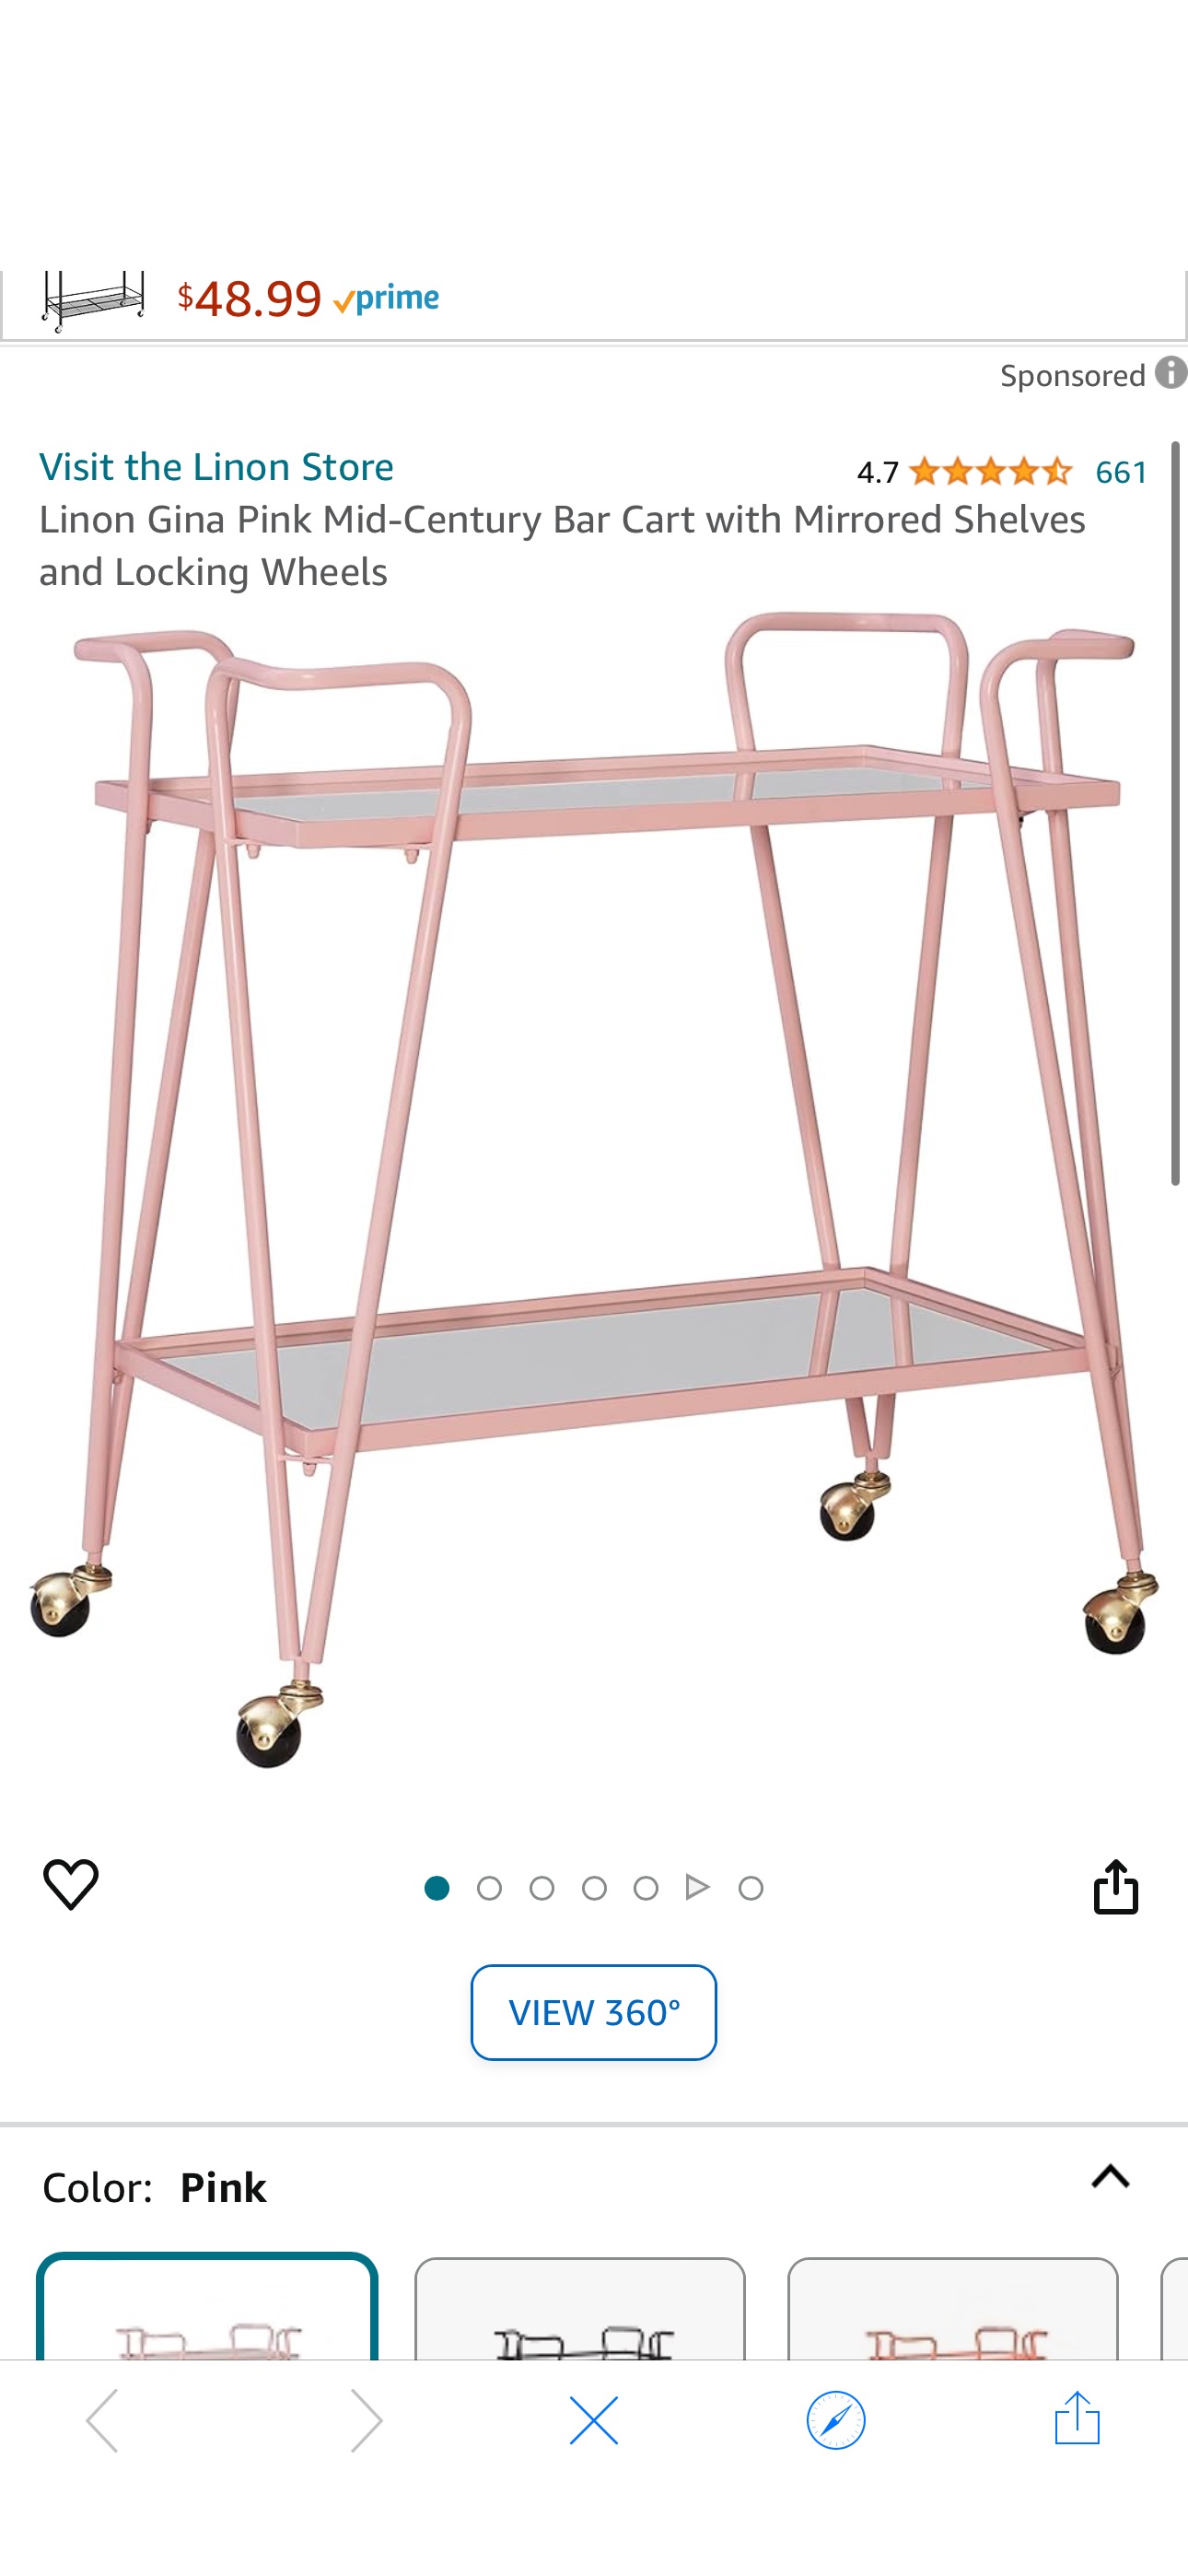 Amazon.com: Linon Gina Pink Mid-Century Bar Cart with Mirrored Shelves and Locking Wheels : Home & Kitchen